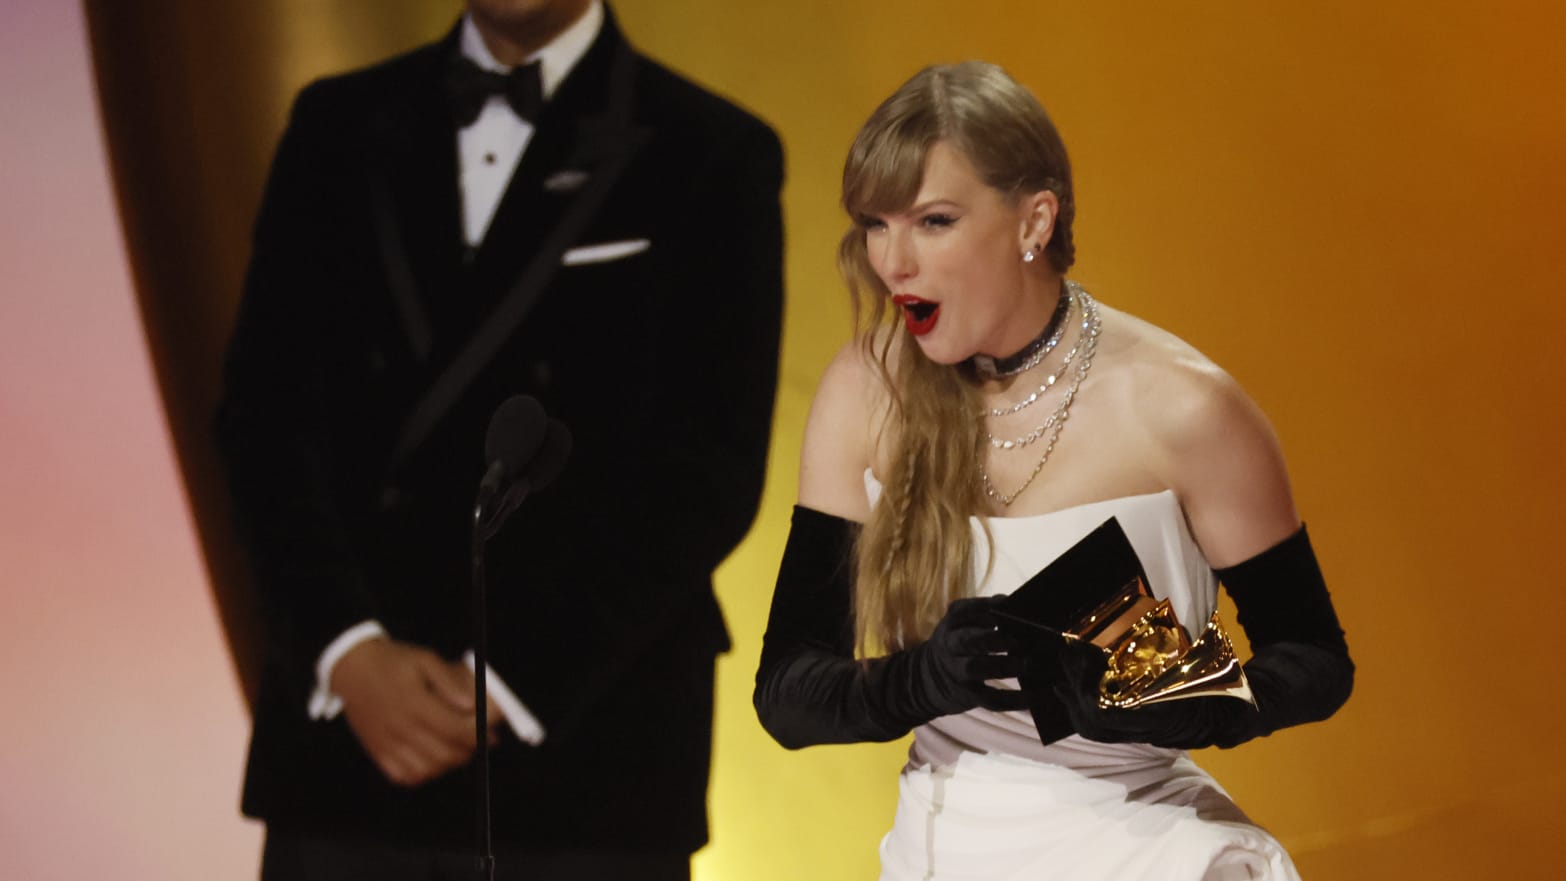 Taylor Swift Announces New Album ‘The Tortured Poets Department’ at Grammys